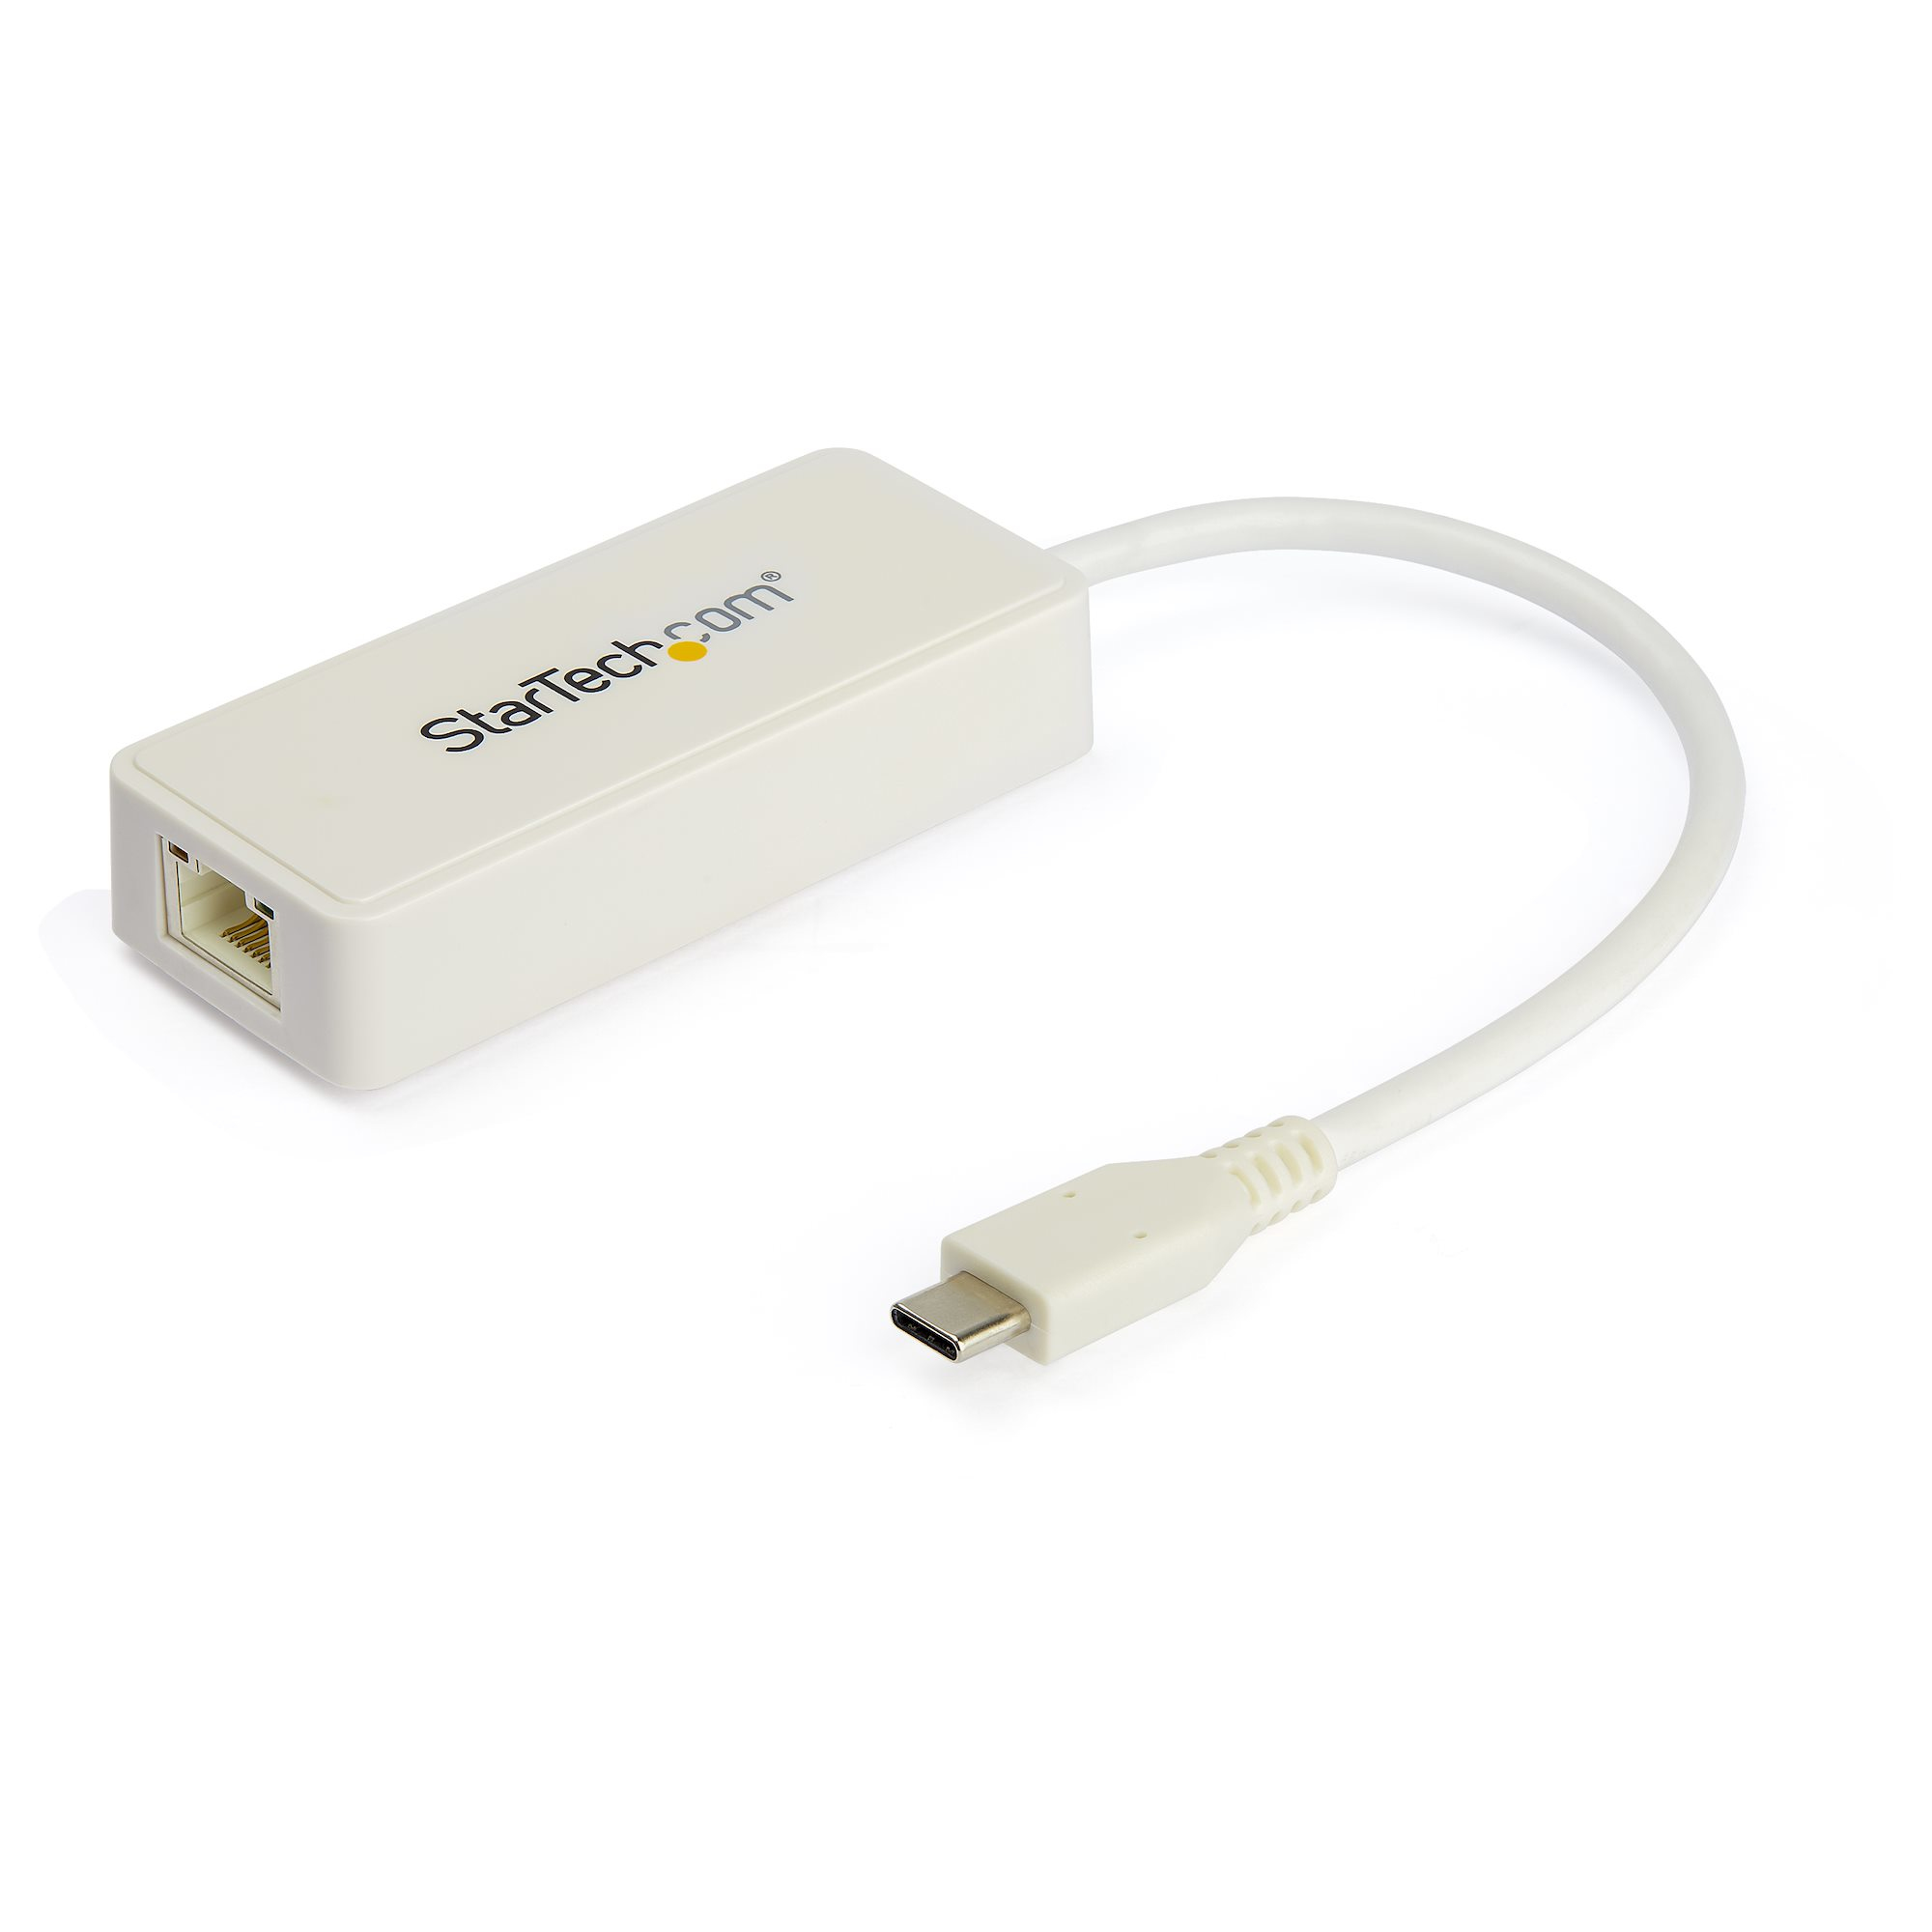 StarTech.com USB C to Gigabit Ethernet Adapter with USB A Port, White 1Gbps NIC USB 3.0/USB 3.1 Type C Network Adapter, 1GbE USB-C RJ45/LAN TB3 Compatible Windows MacBook Pro Chromebook - USB C to Ethernet (US1GC301AUW) - Network adapter - USB-C - Gigabit